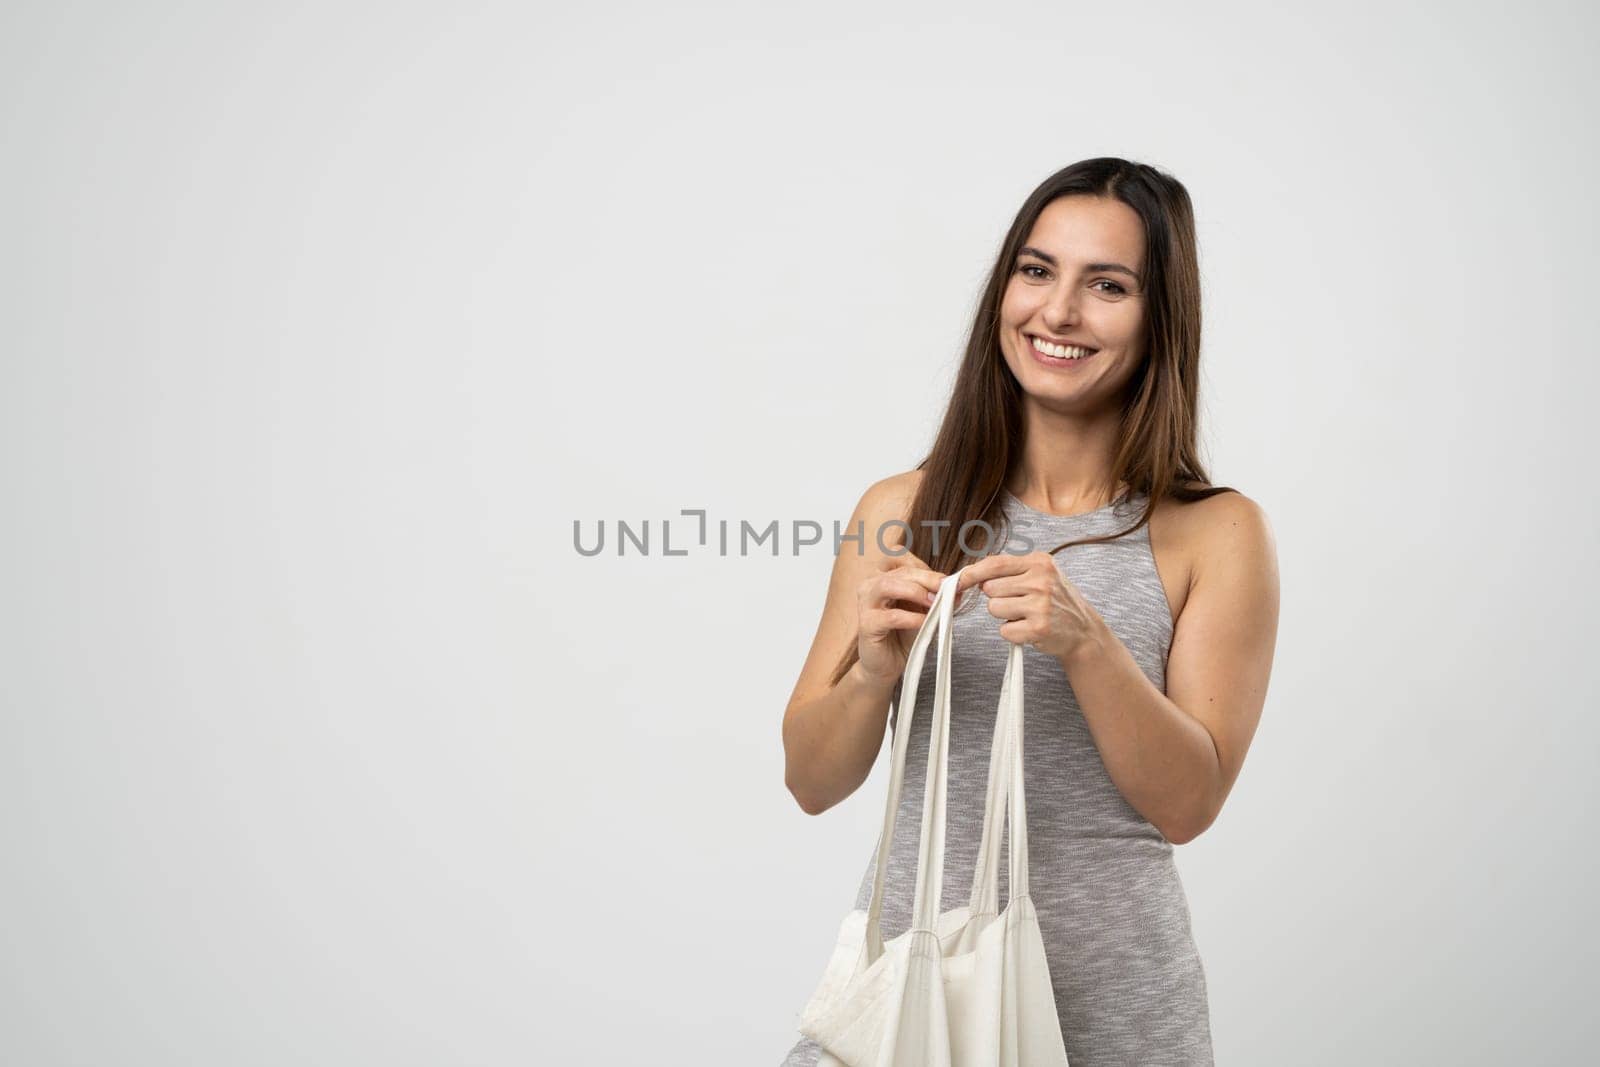 Ecology Concept. Woman holding cotton grocery bag with vegetables. Reusable eco bag for shopping. Zero waste concept. Eco friendly lifestyle. Isolated white background